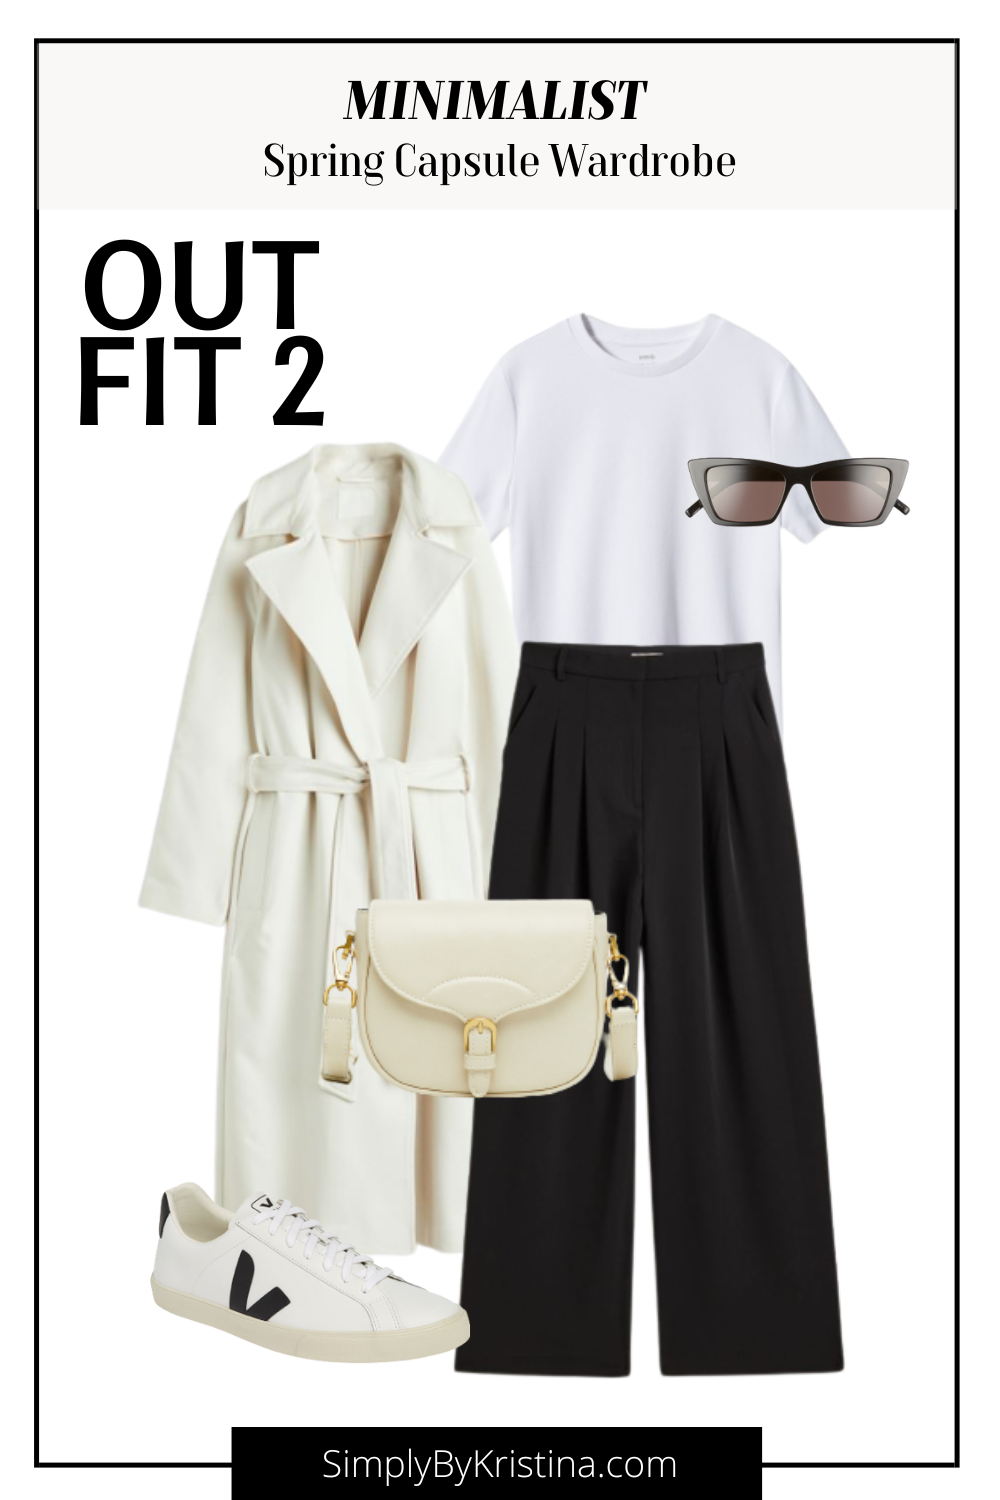 16 Minimalist Staples You Need For Your Spring Capsule Wardrobe